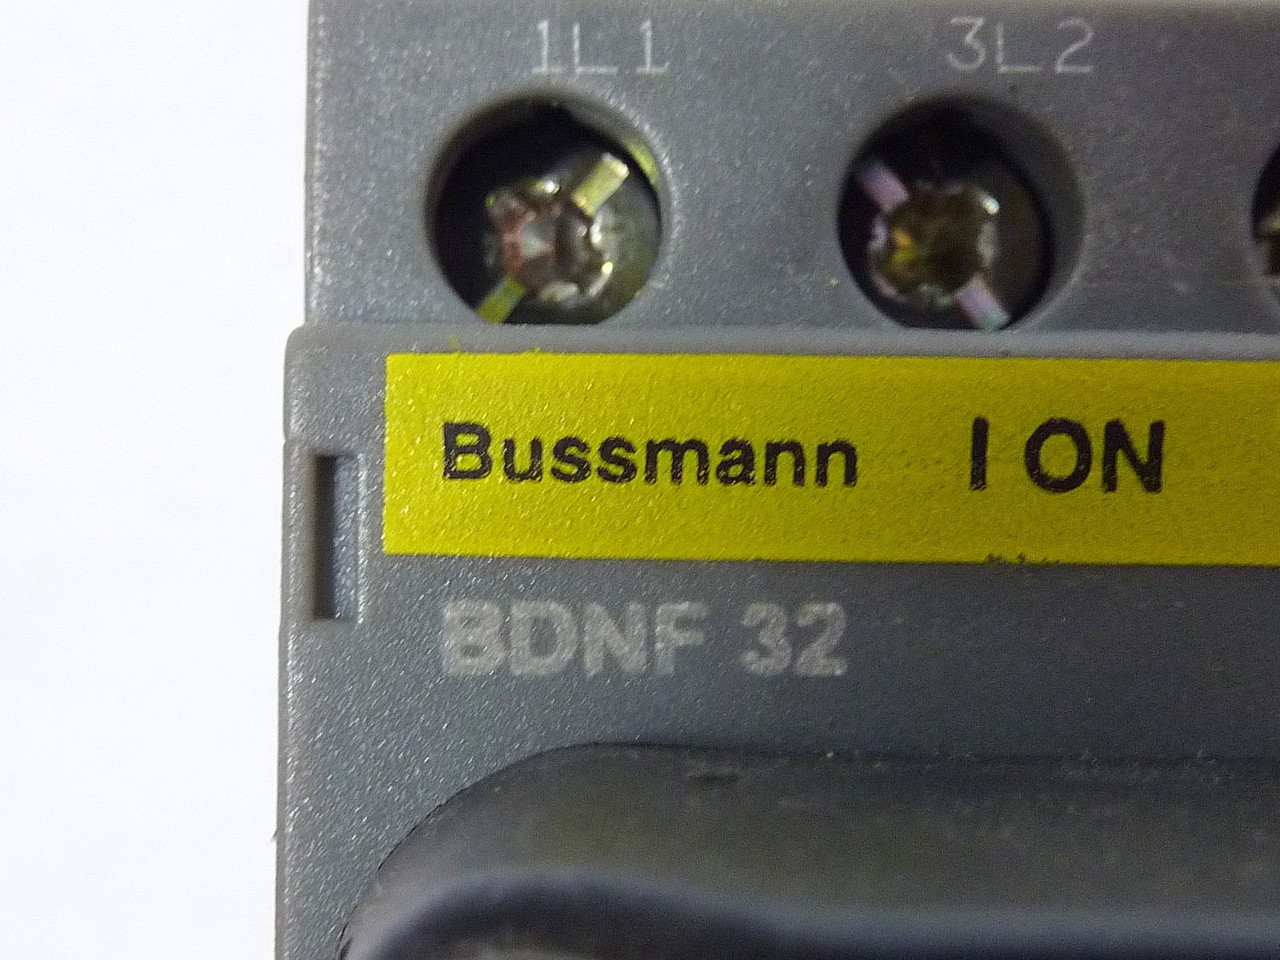 Bussmann BDNF-32 Disconnect Switch 600V 40A USED